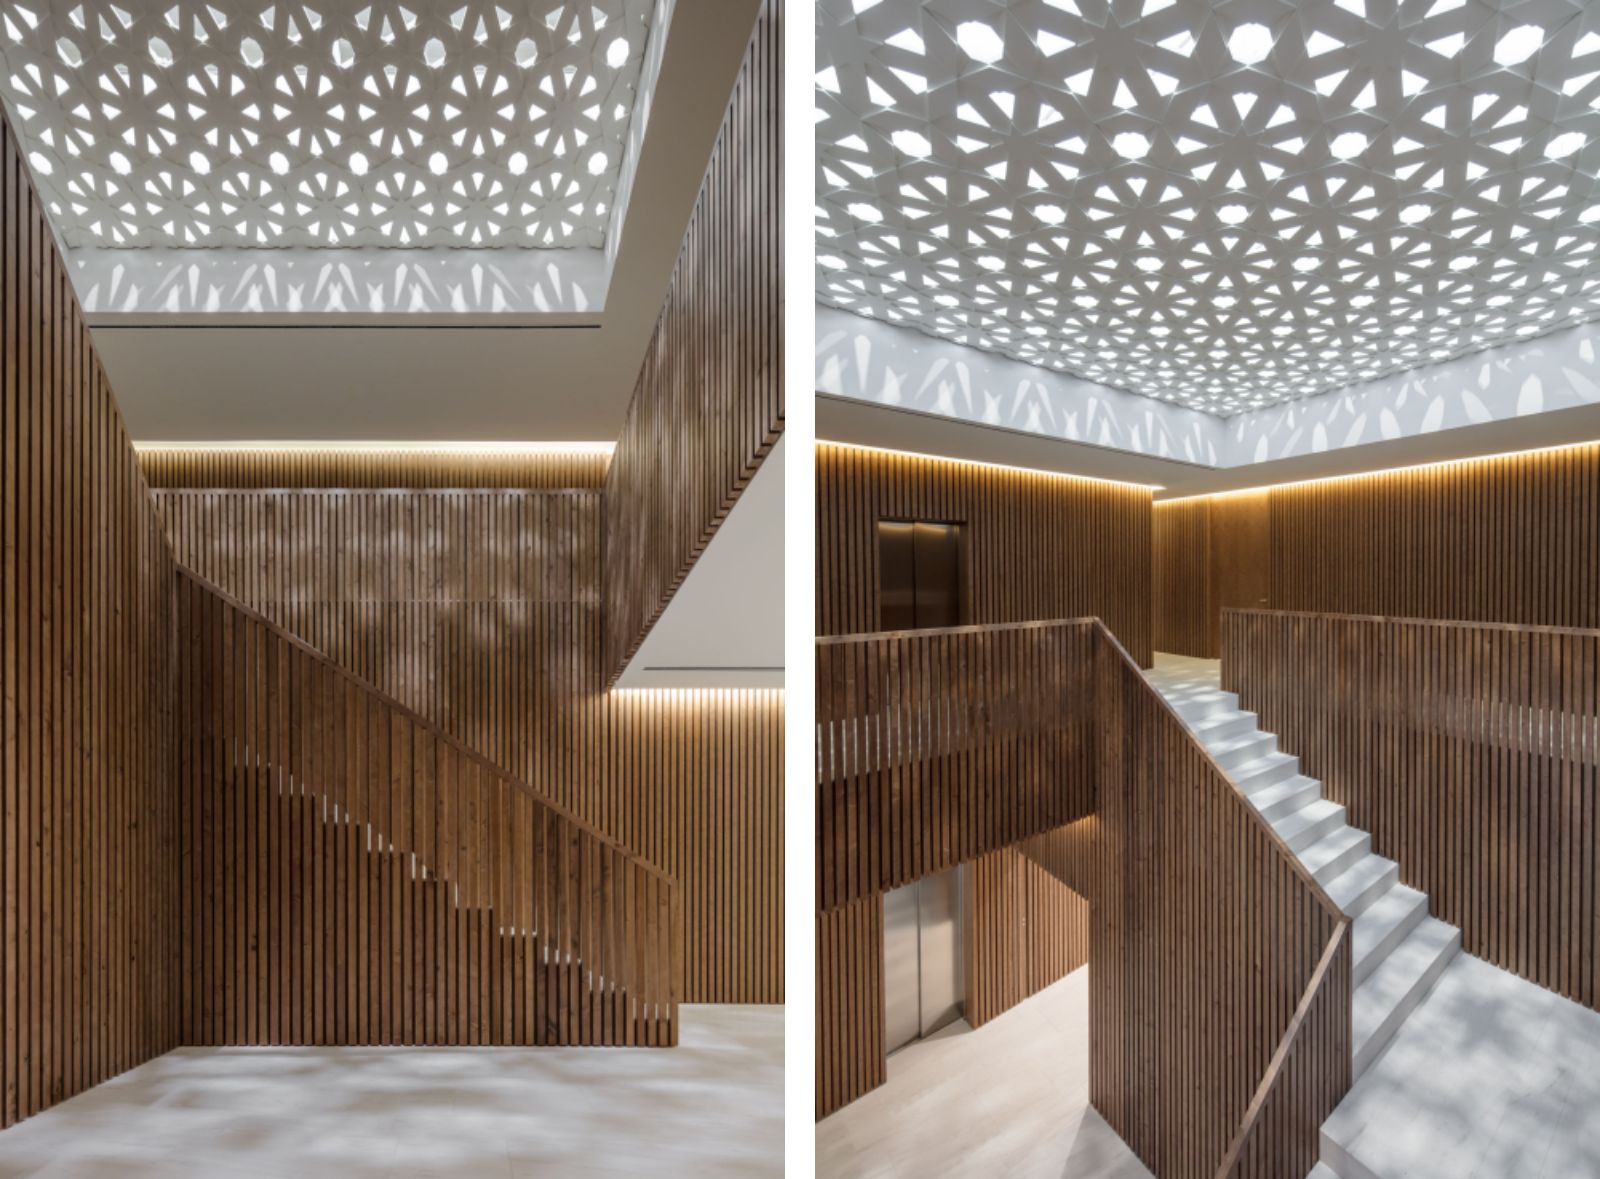 Embassy-of-Egypt-by-Promontorio-12 – aasarchitecture